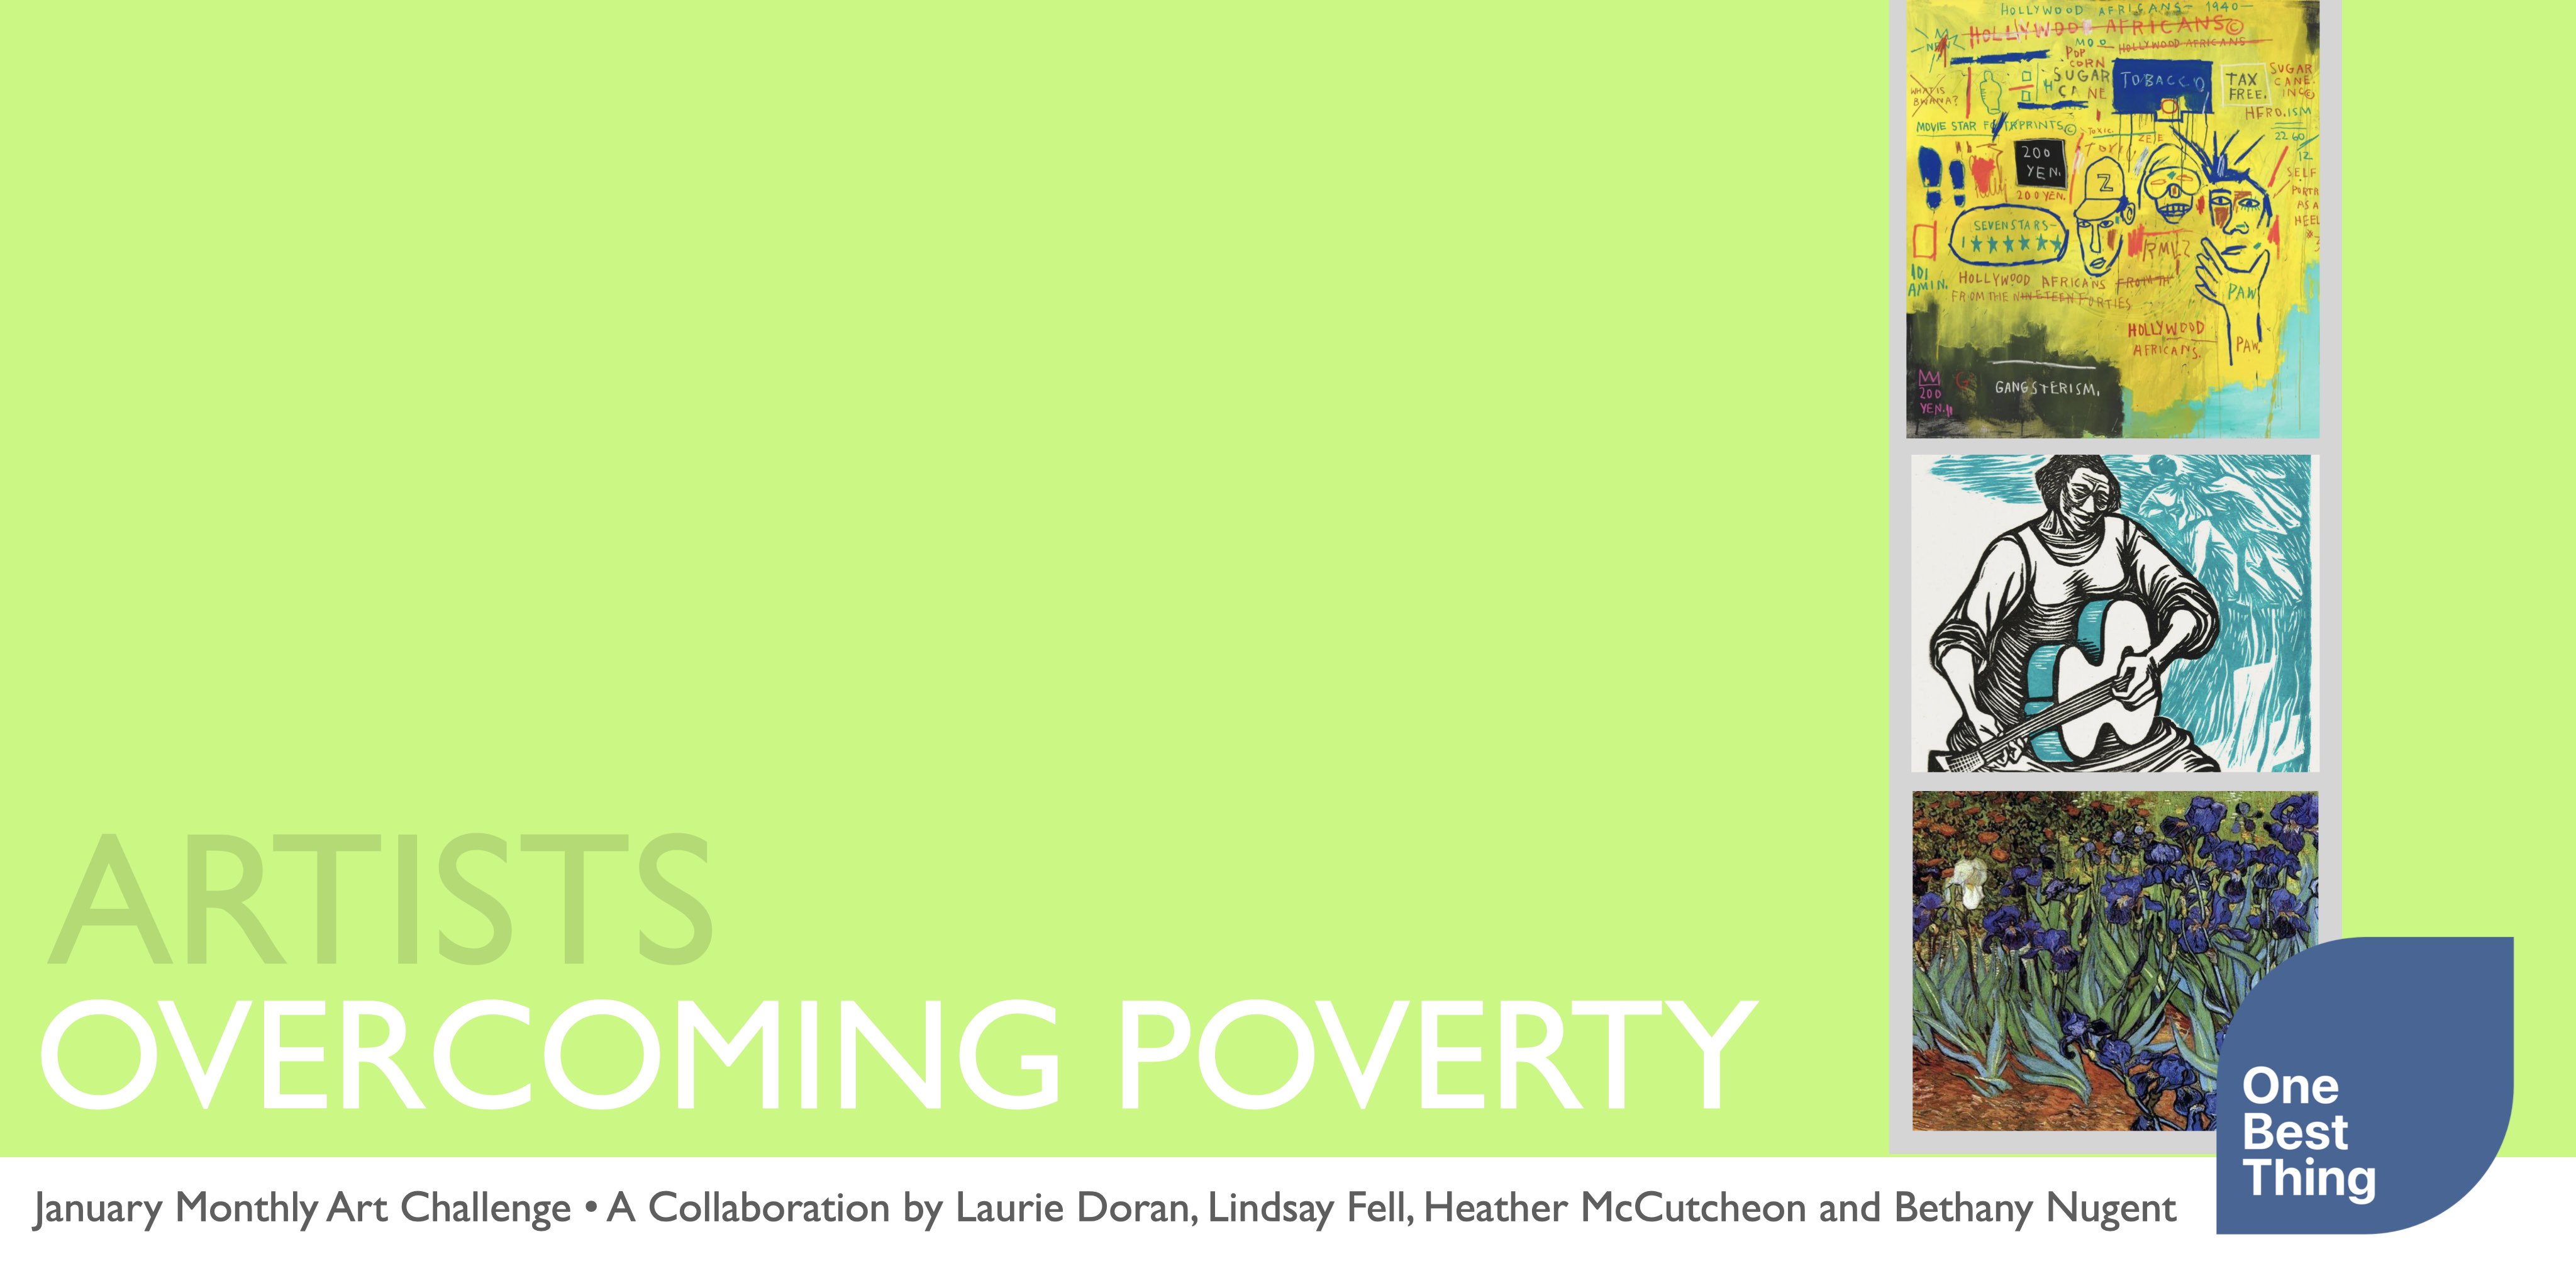 Image shows the title "Artists Overcoming Poverty" and features images from Basquait, Catlett, and Van Gogh.